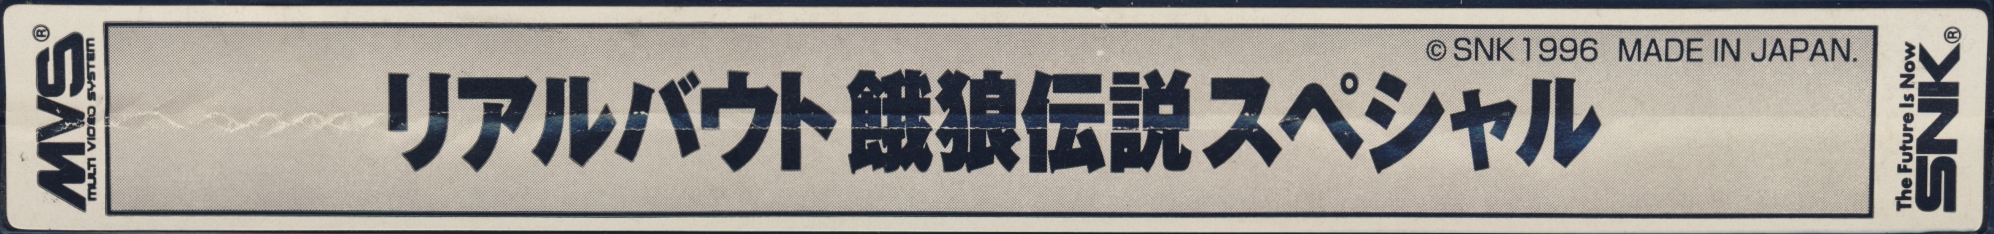 Real bout fatal fury special jp label.jpg